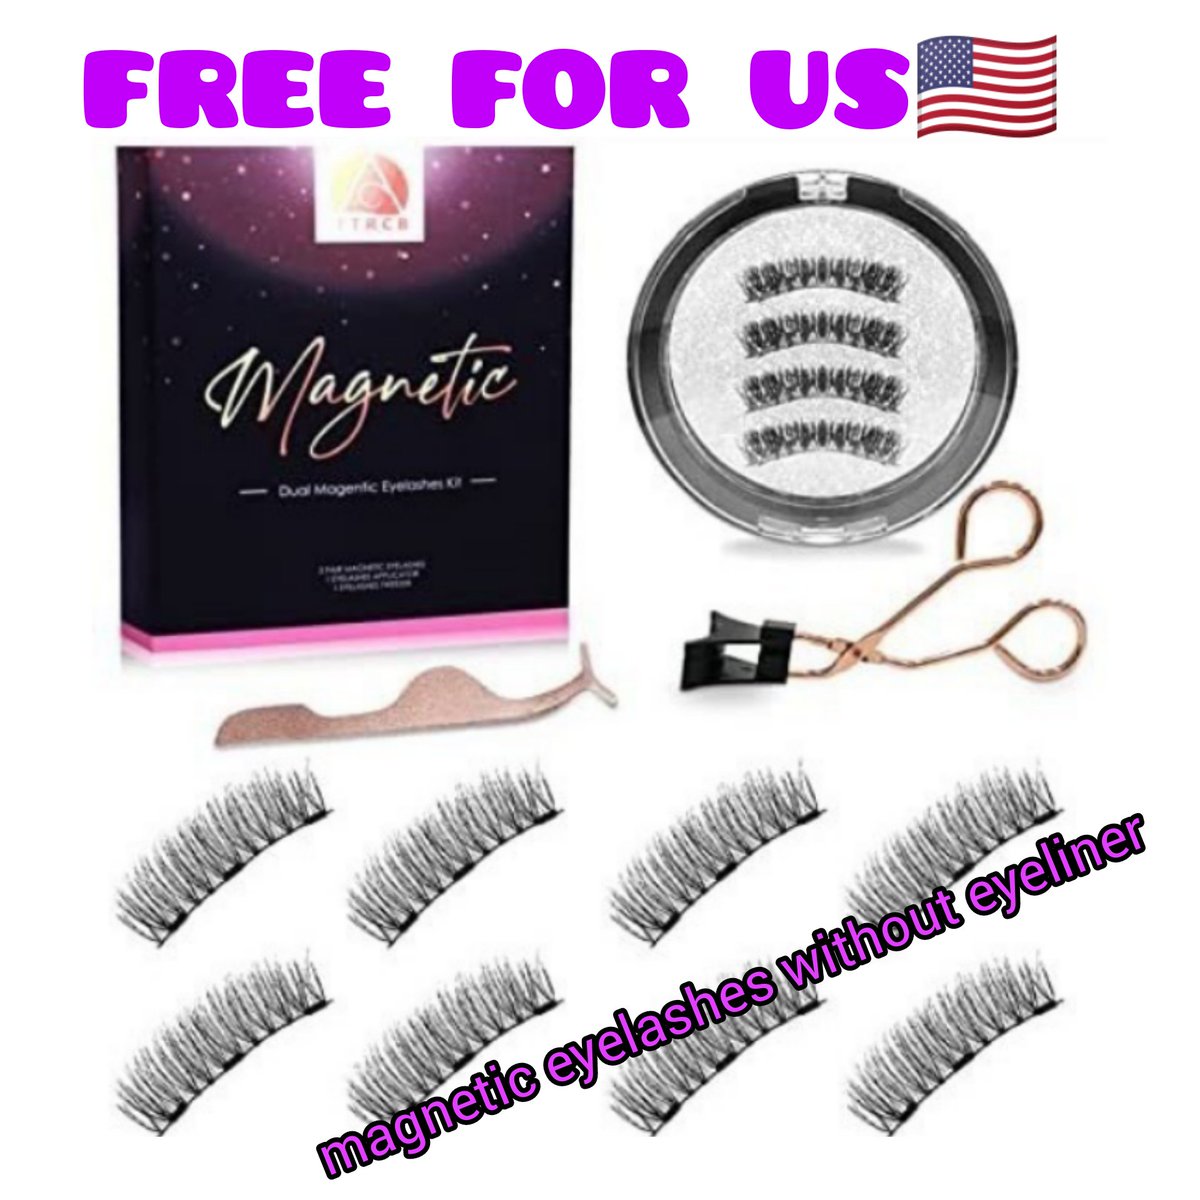 FOR USA 🇺🇸
magnetic eyelashes without eyeliner
R-e-f-u-n-d A-f-t-e-r R-e-v-i-e-w🔥
Pp & Pro*duct🎁 F*ee C-o-v-e-r-d🔥
Inbox ✉️ me if you are interested ✨
#usgiveaways
#ustester 
#usabeautyproducts
#usfashion 
#eyelashes
#eyelashextensions
#magneticlasheseyelash
#usmakeup